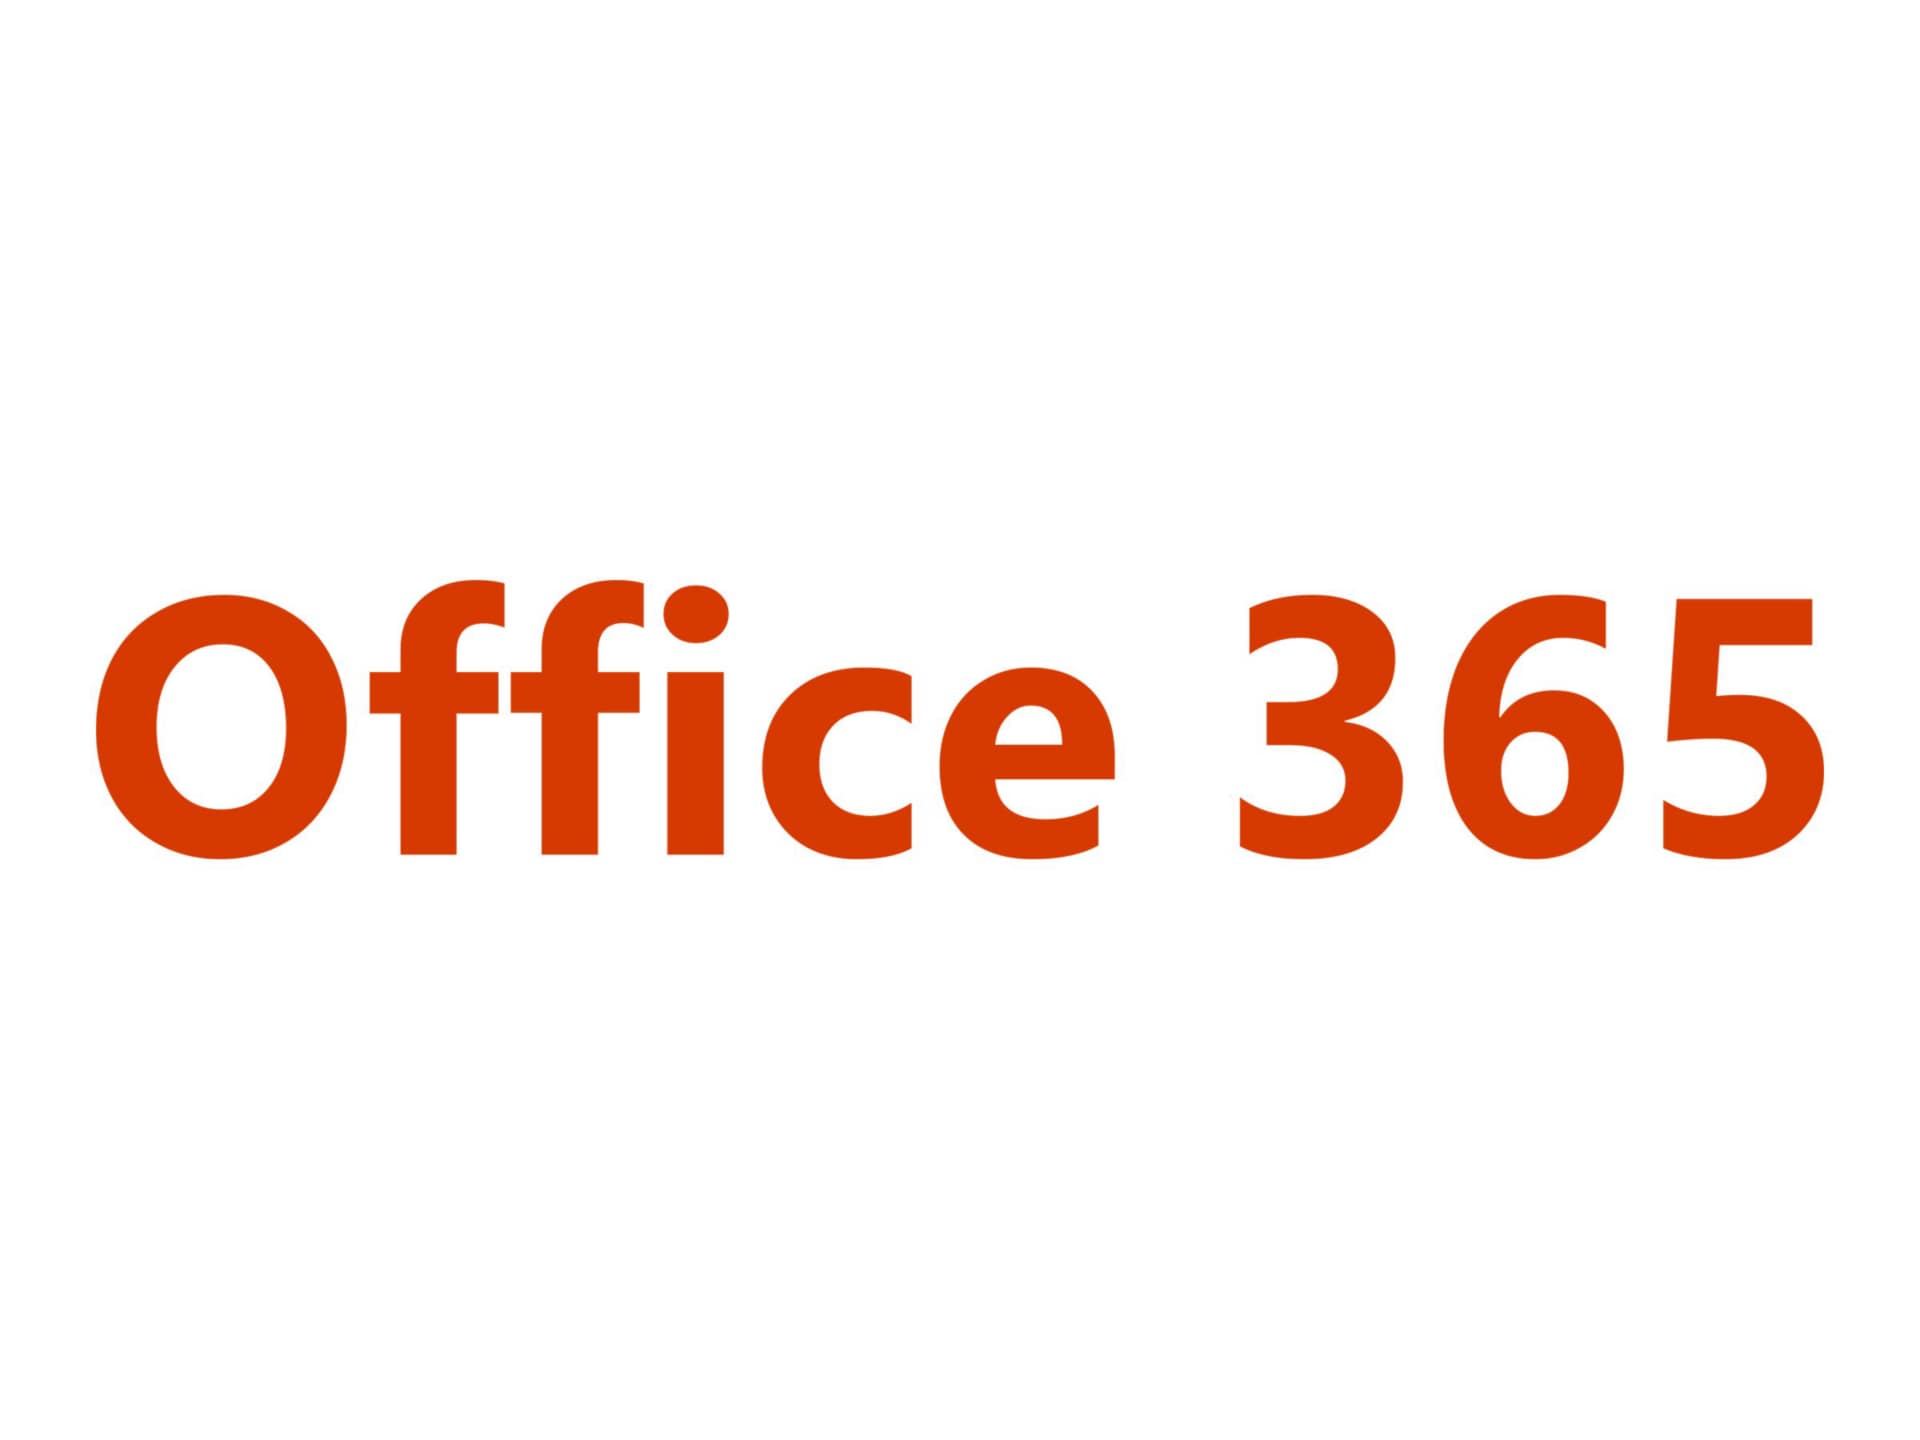 Microsoft Office 365 Enterprise E5 without PSTN Conferencing - subscription license (1 month) - 1 user